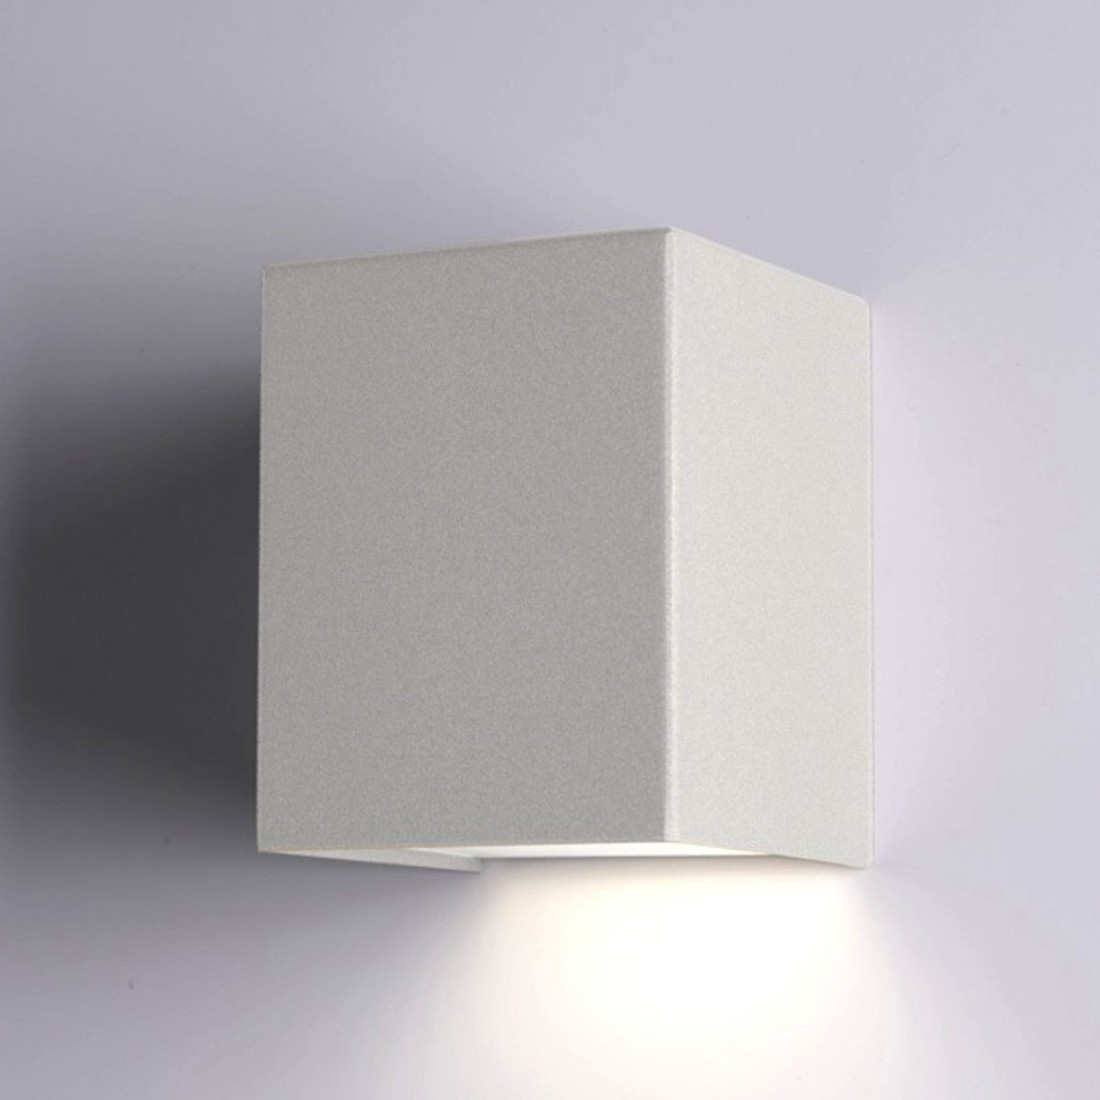 Applique murale LED moderne CUBICK 899 5A Cattaneo lighting